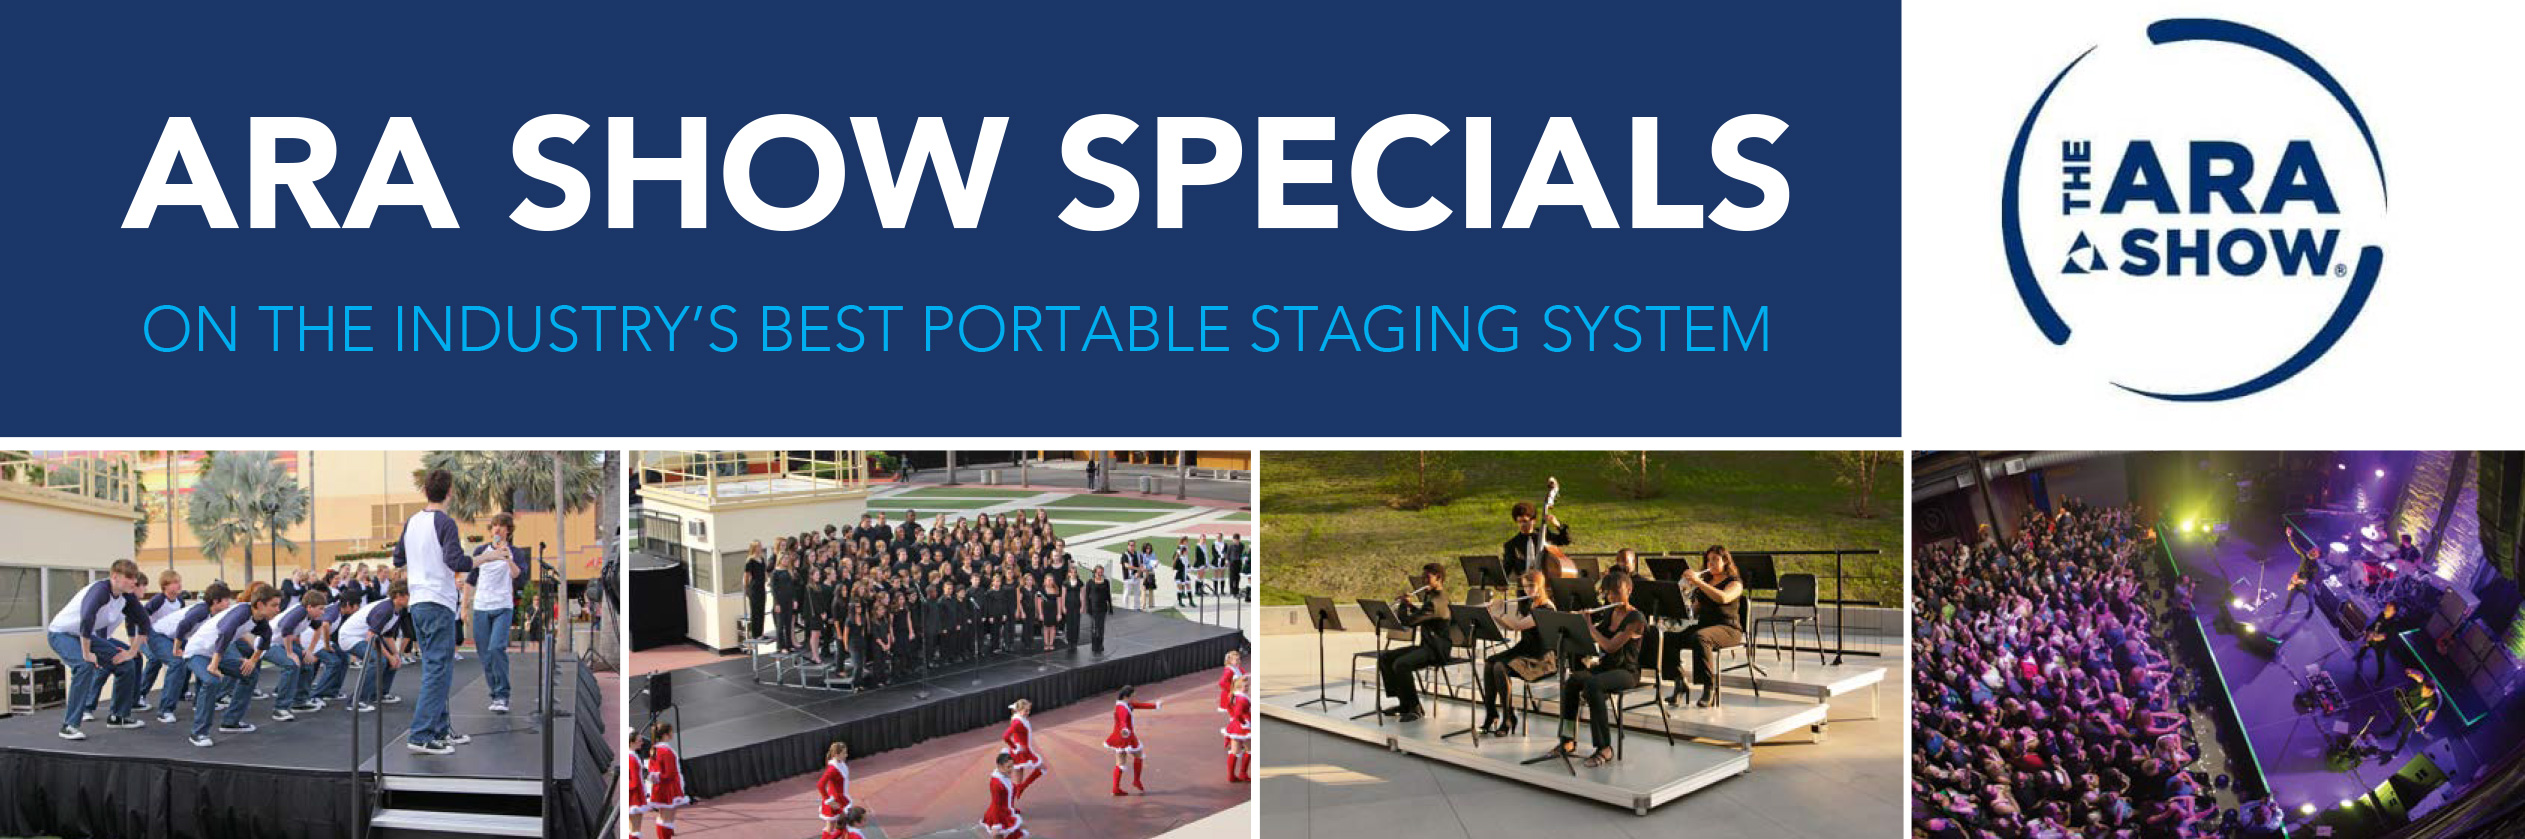 ARA SHOW SPECIALS ON THE INDUSTRY’S BEST PORTABLE STAGING SYSTEM